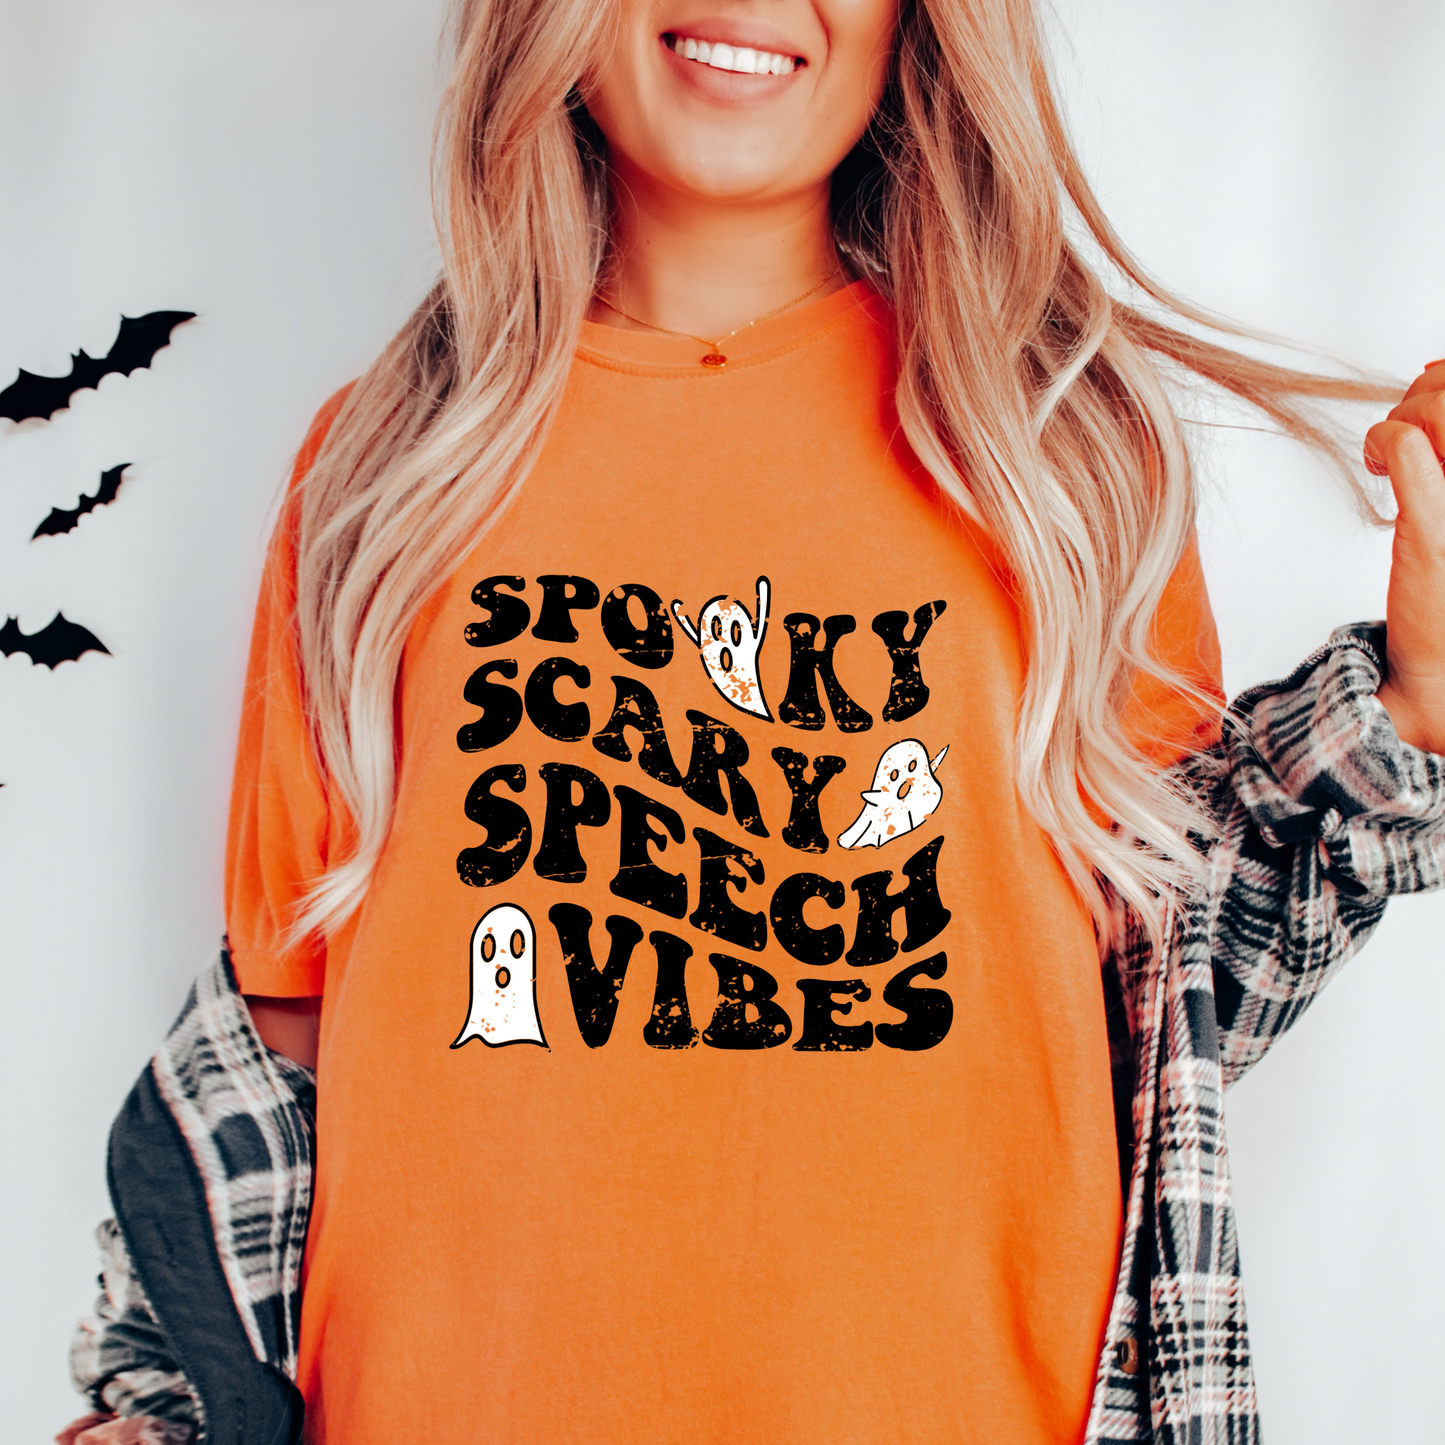 Spooky Scary Speech Vibes Comfort Colors T-Shirt